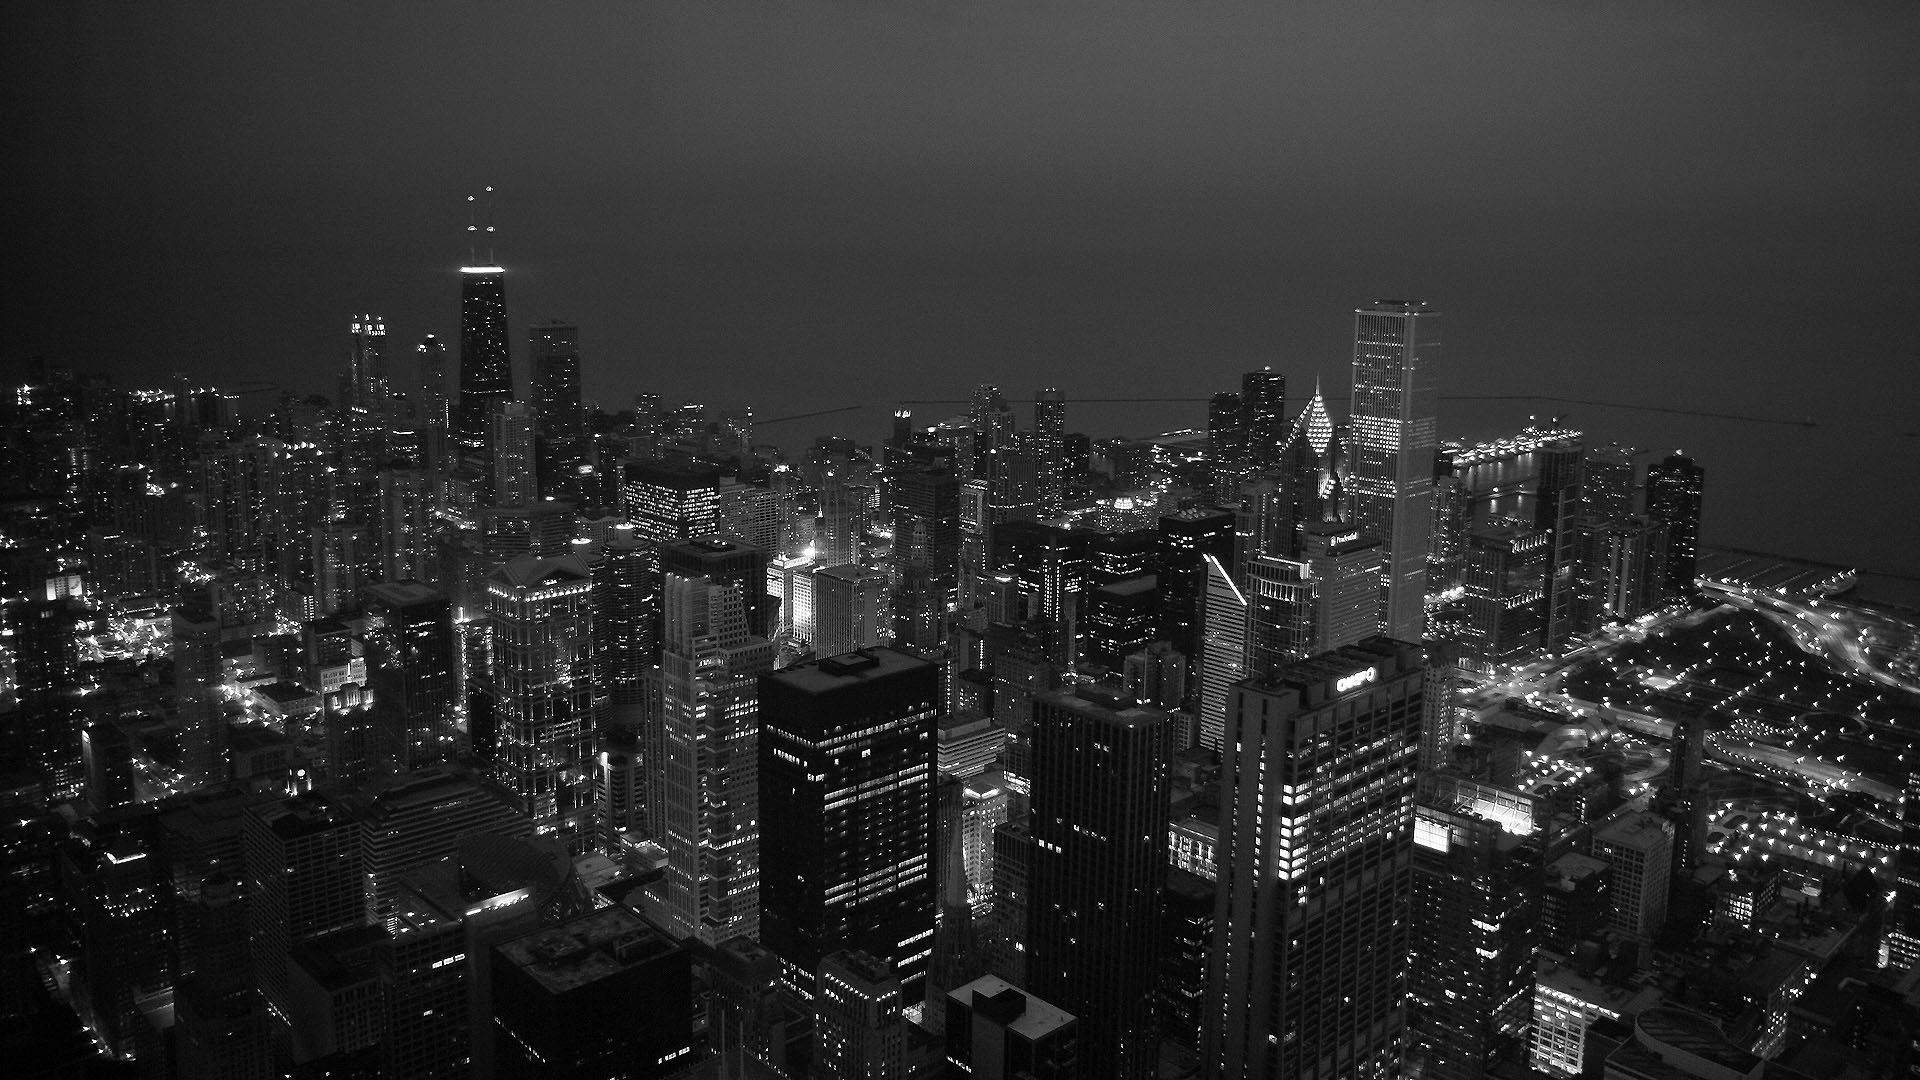 Metropolitan Sophistication - A Stunning Black And White View Of A City Skyline.